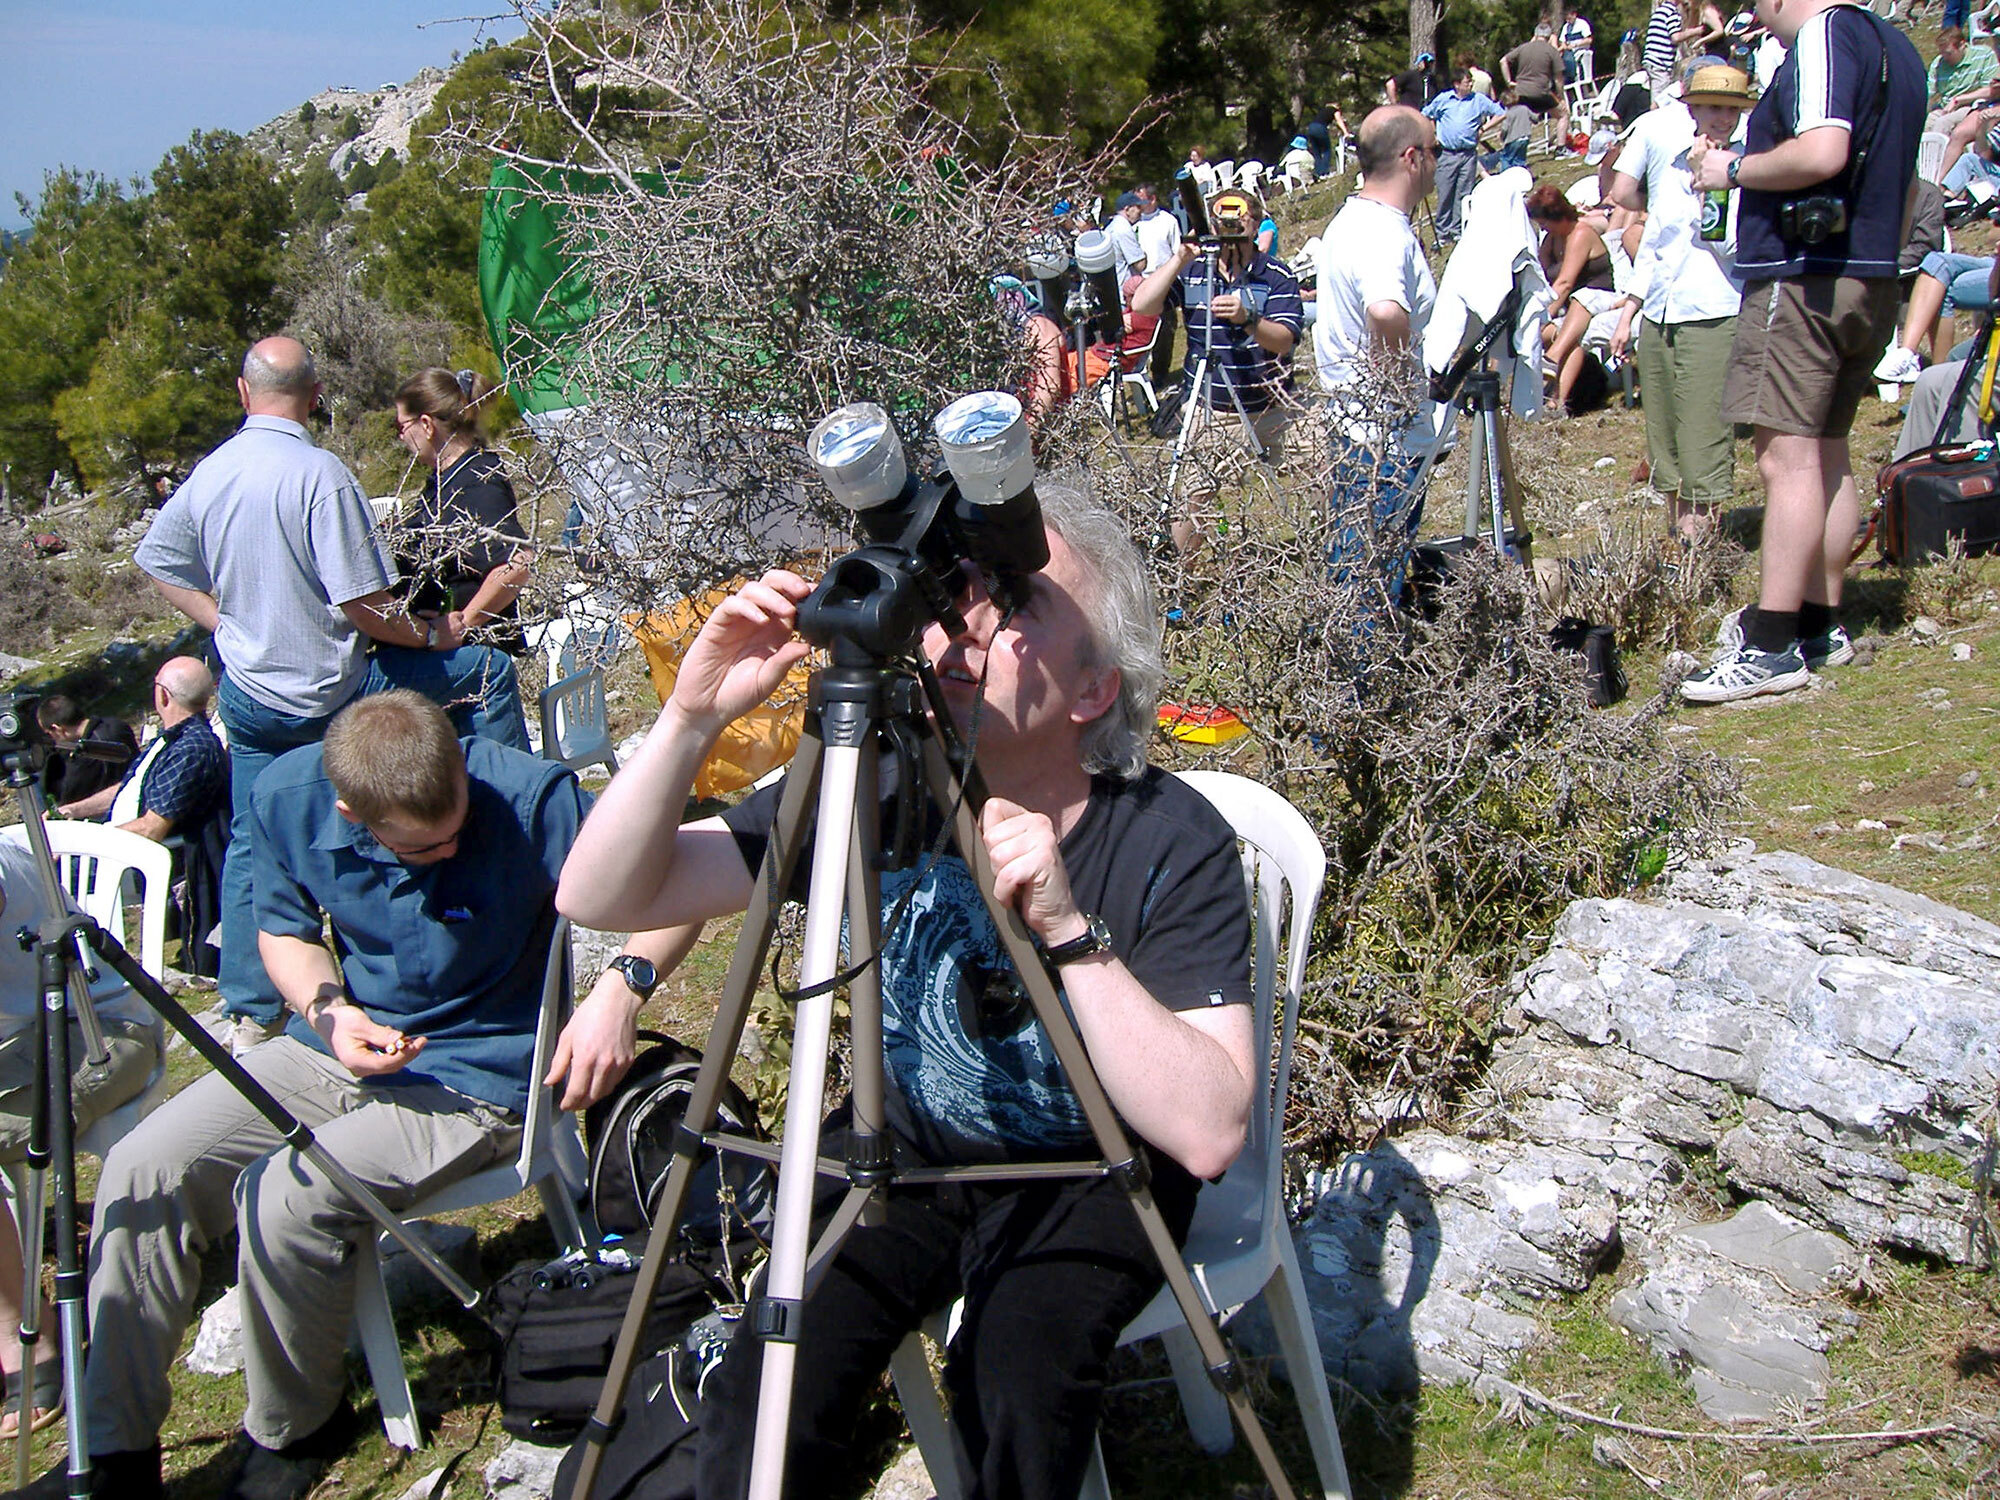 In the foreground, a woman sits in a chair and looks through a pair of binoculars affixed on a tripod and pointed upward. The binoculars have silver-colored coverings over the two ends of the binoculars that are pointed upward toward the Sun. Other people are seen sitting and standing around the woman and in the background.